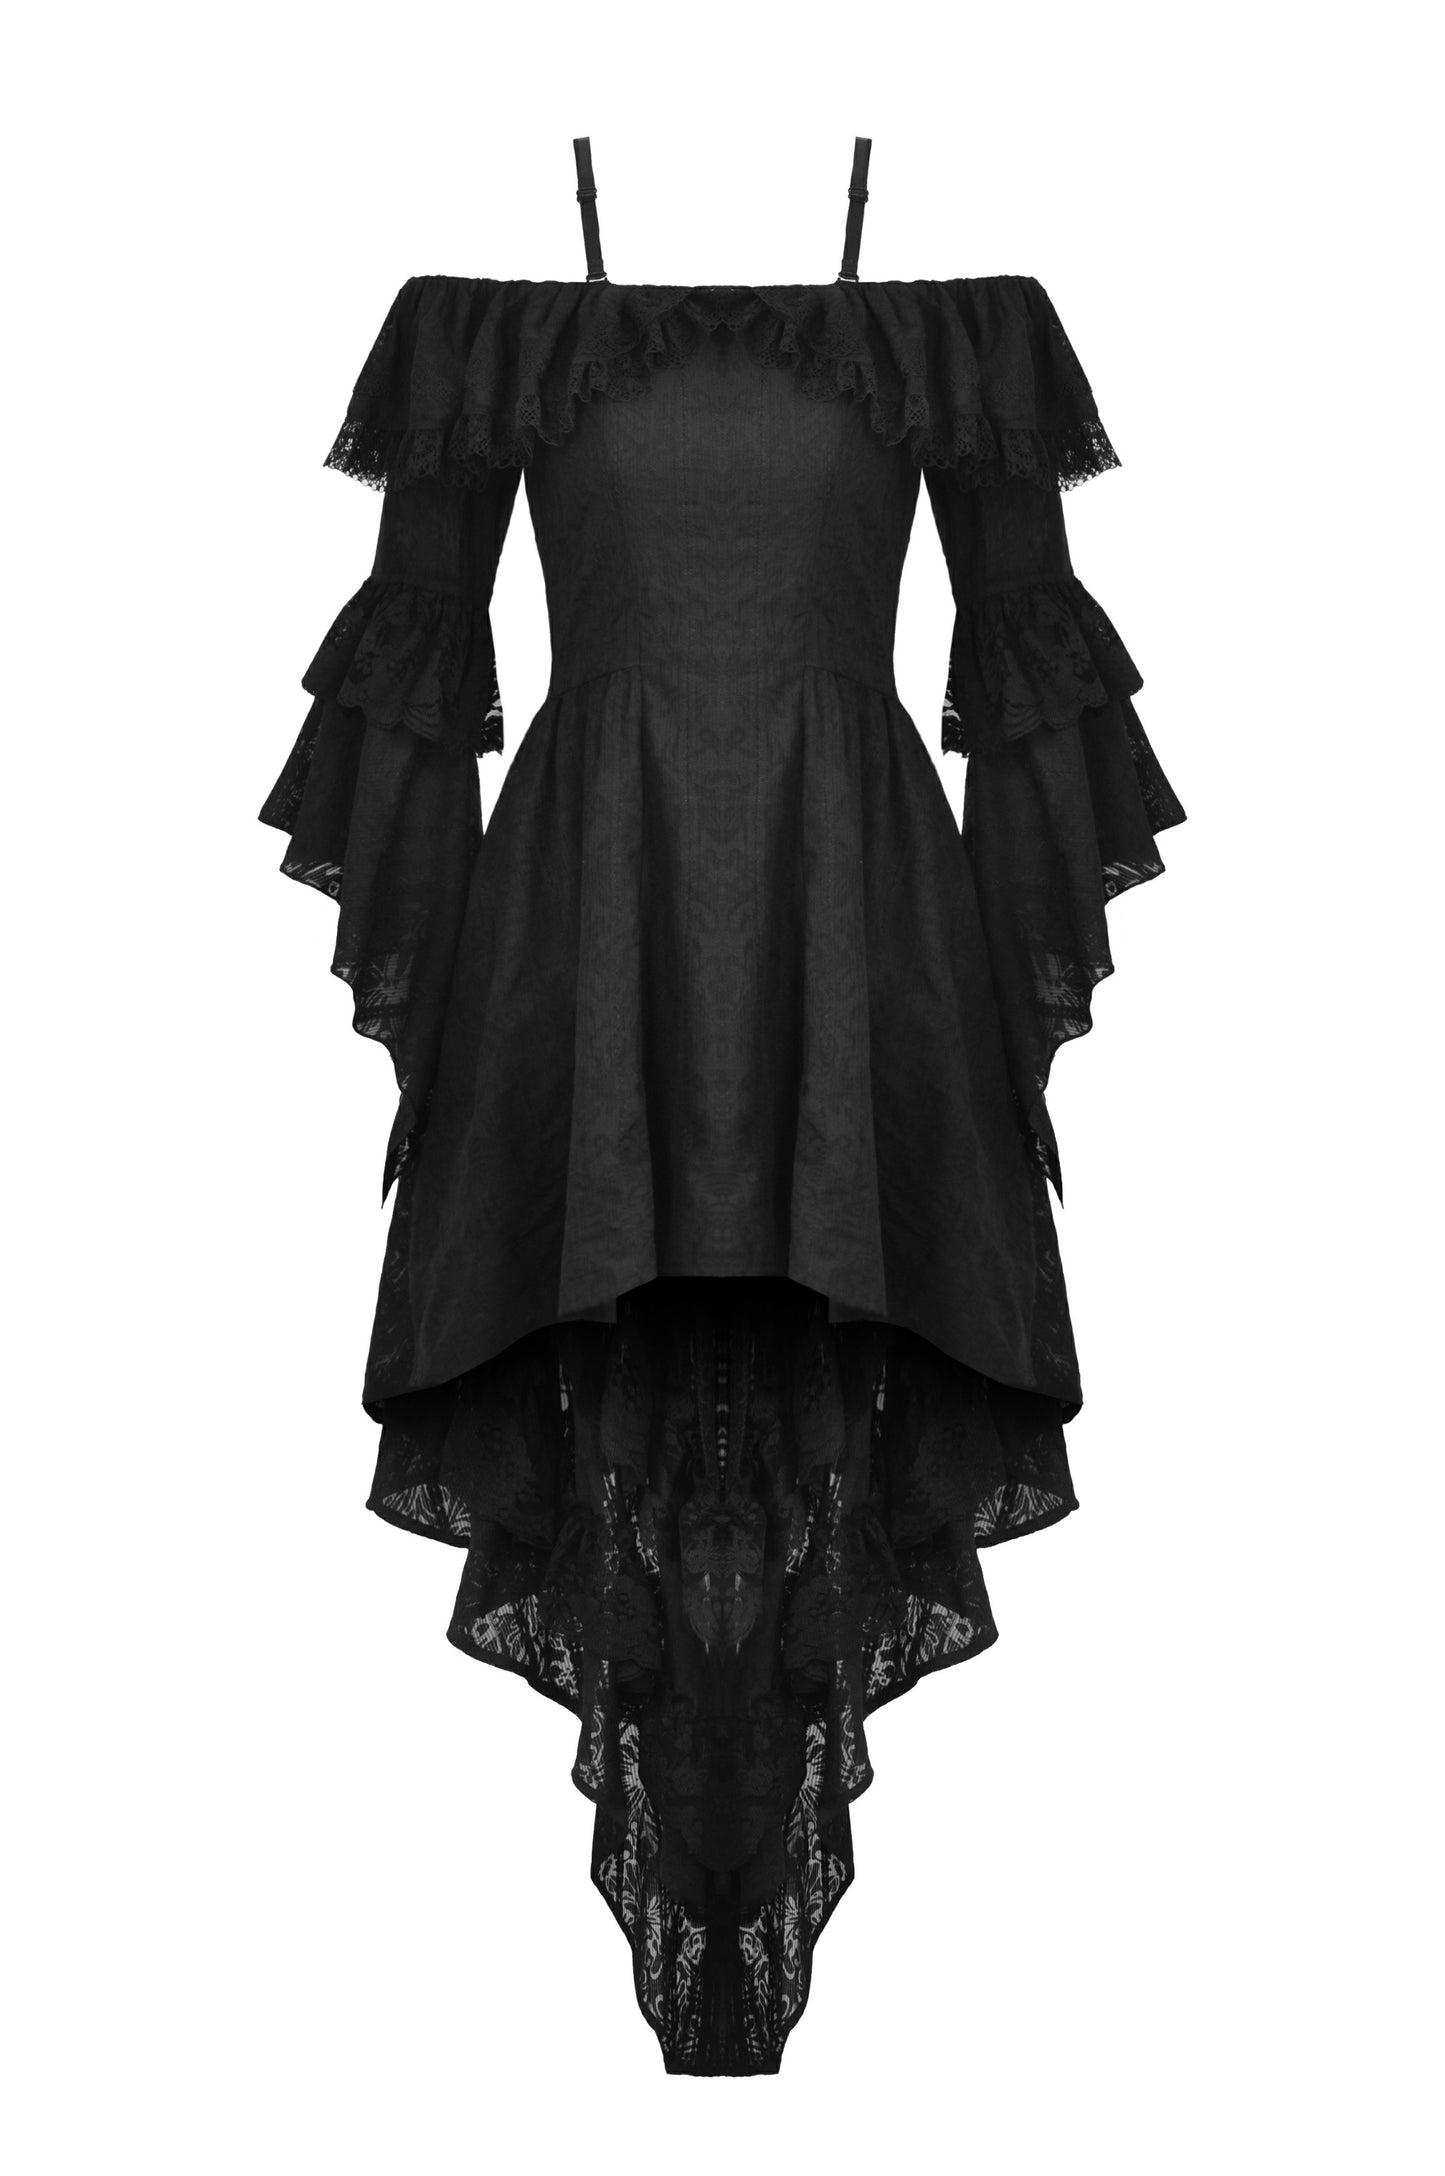 Twilight Gothic Lace Trim High Low Dress by Dark In Love